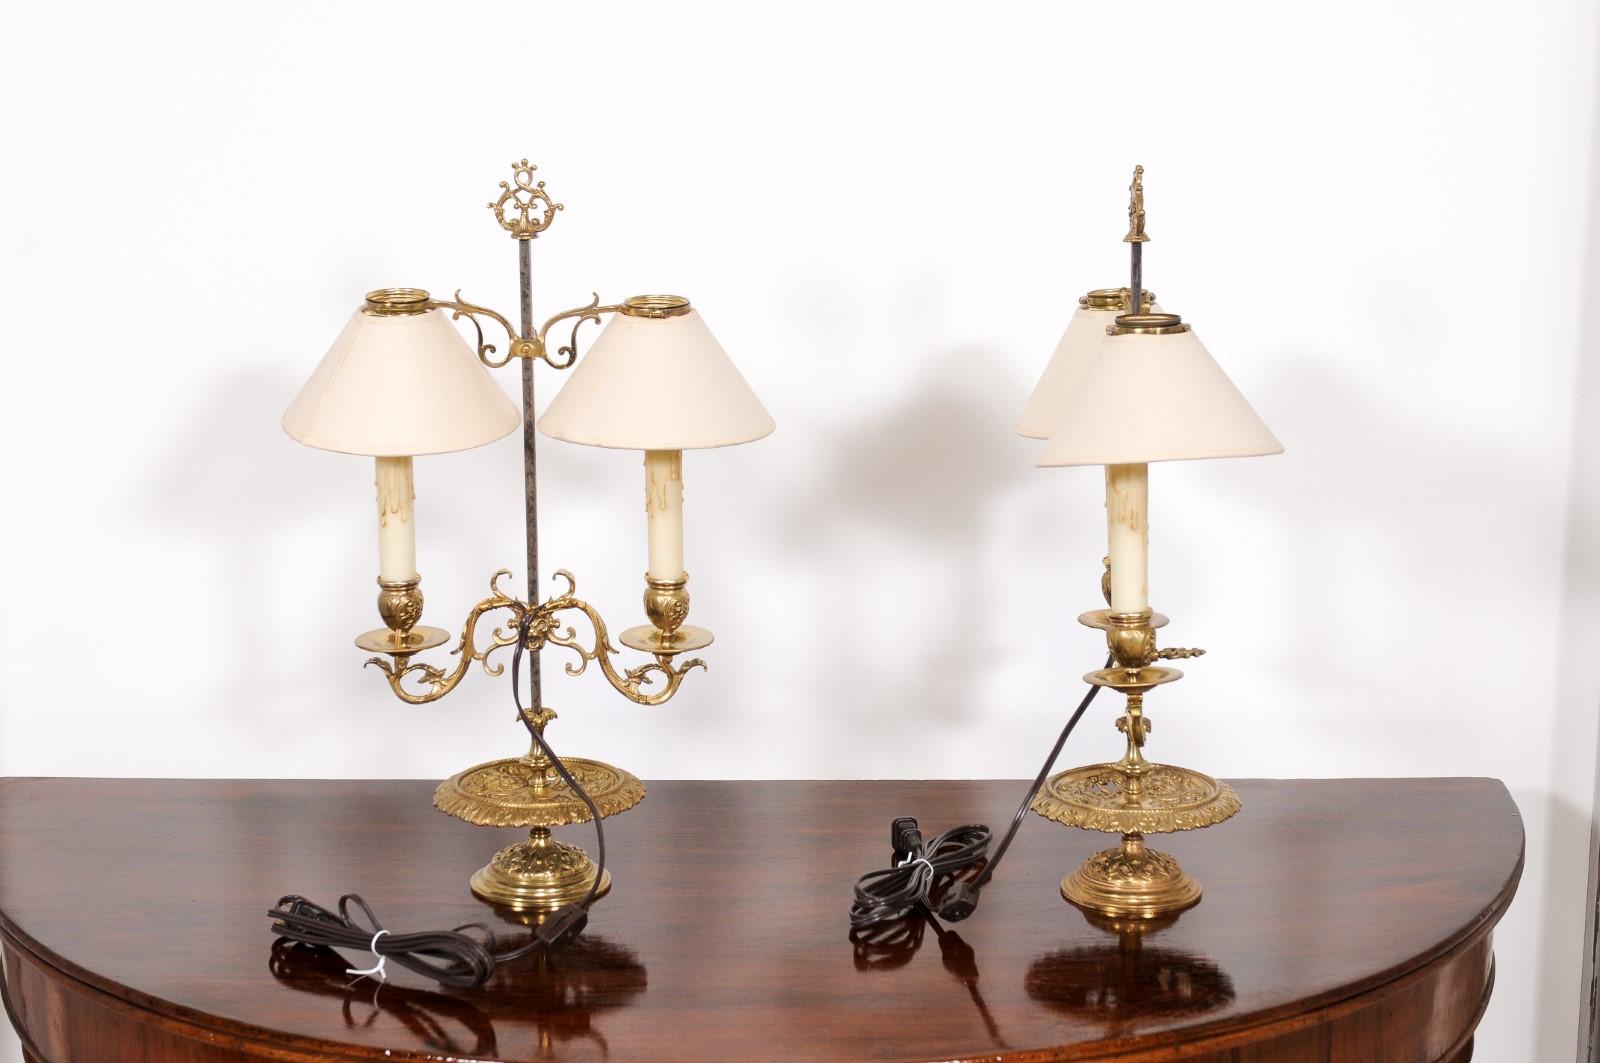 French 19th Century Brass Candlestick Lamps with Scrolling Arms, a Wired Pair For Sale 7